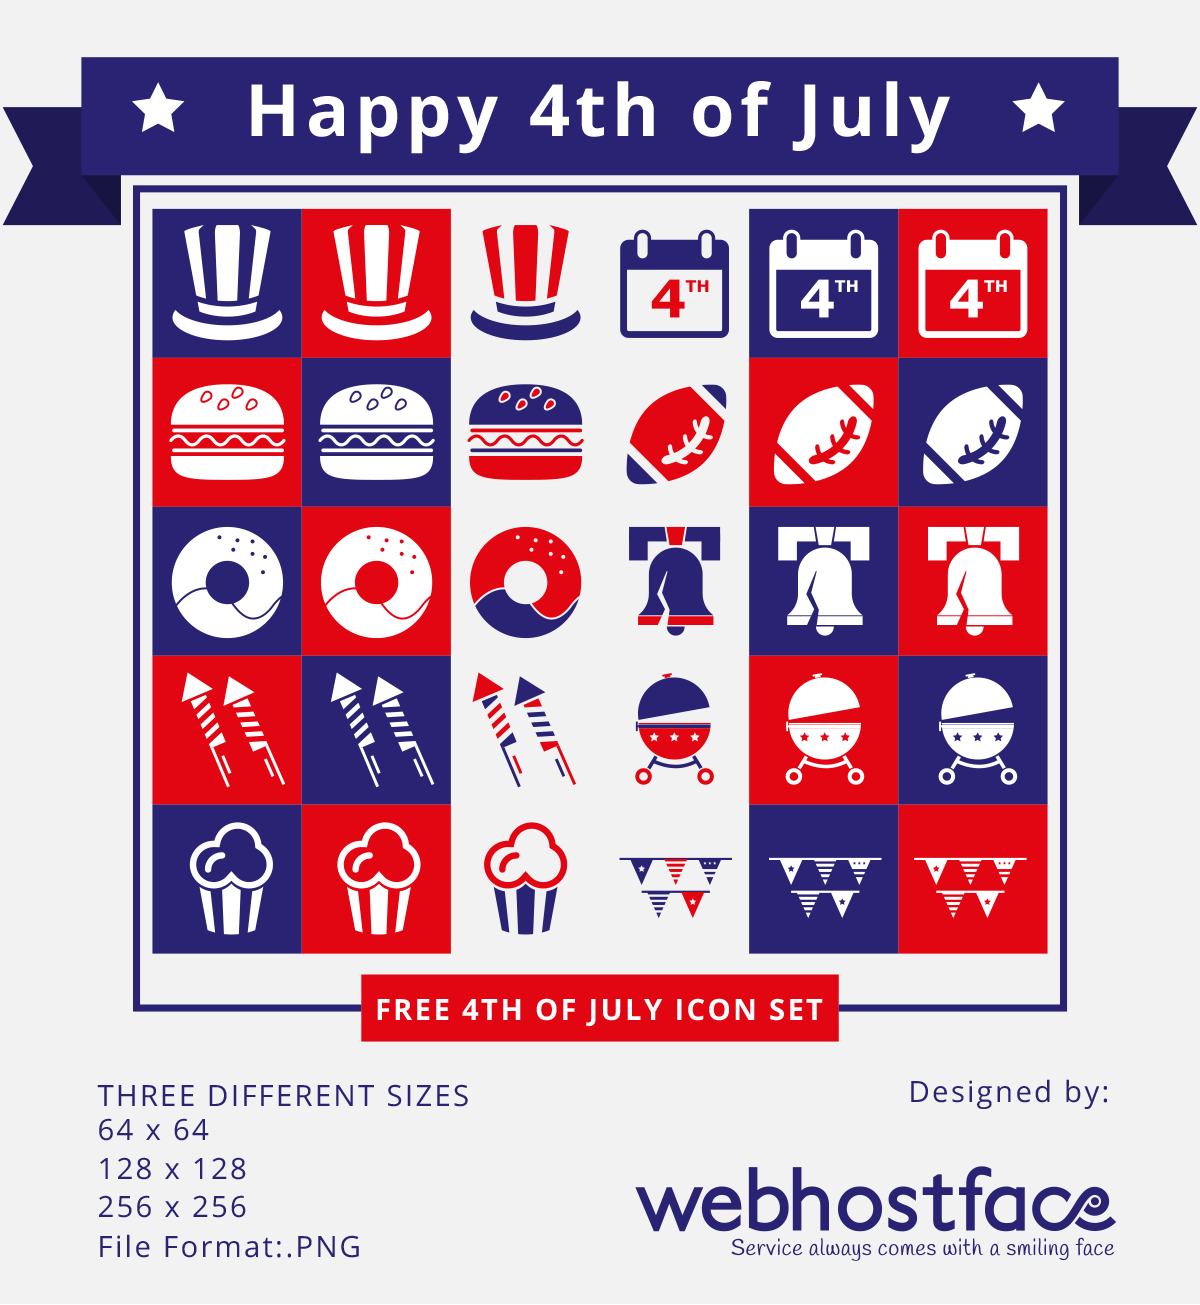 Free 4th of July Icon Set